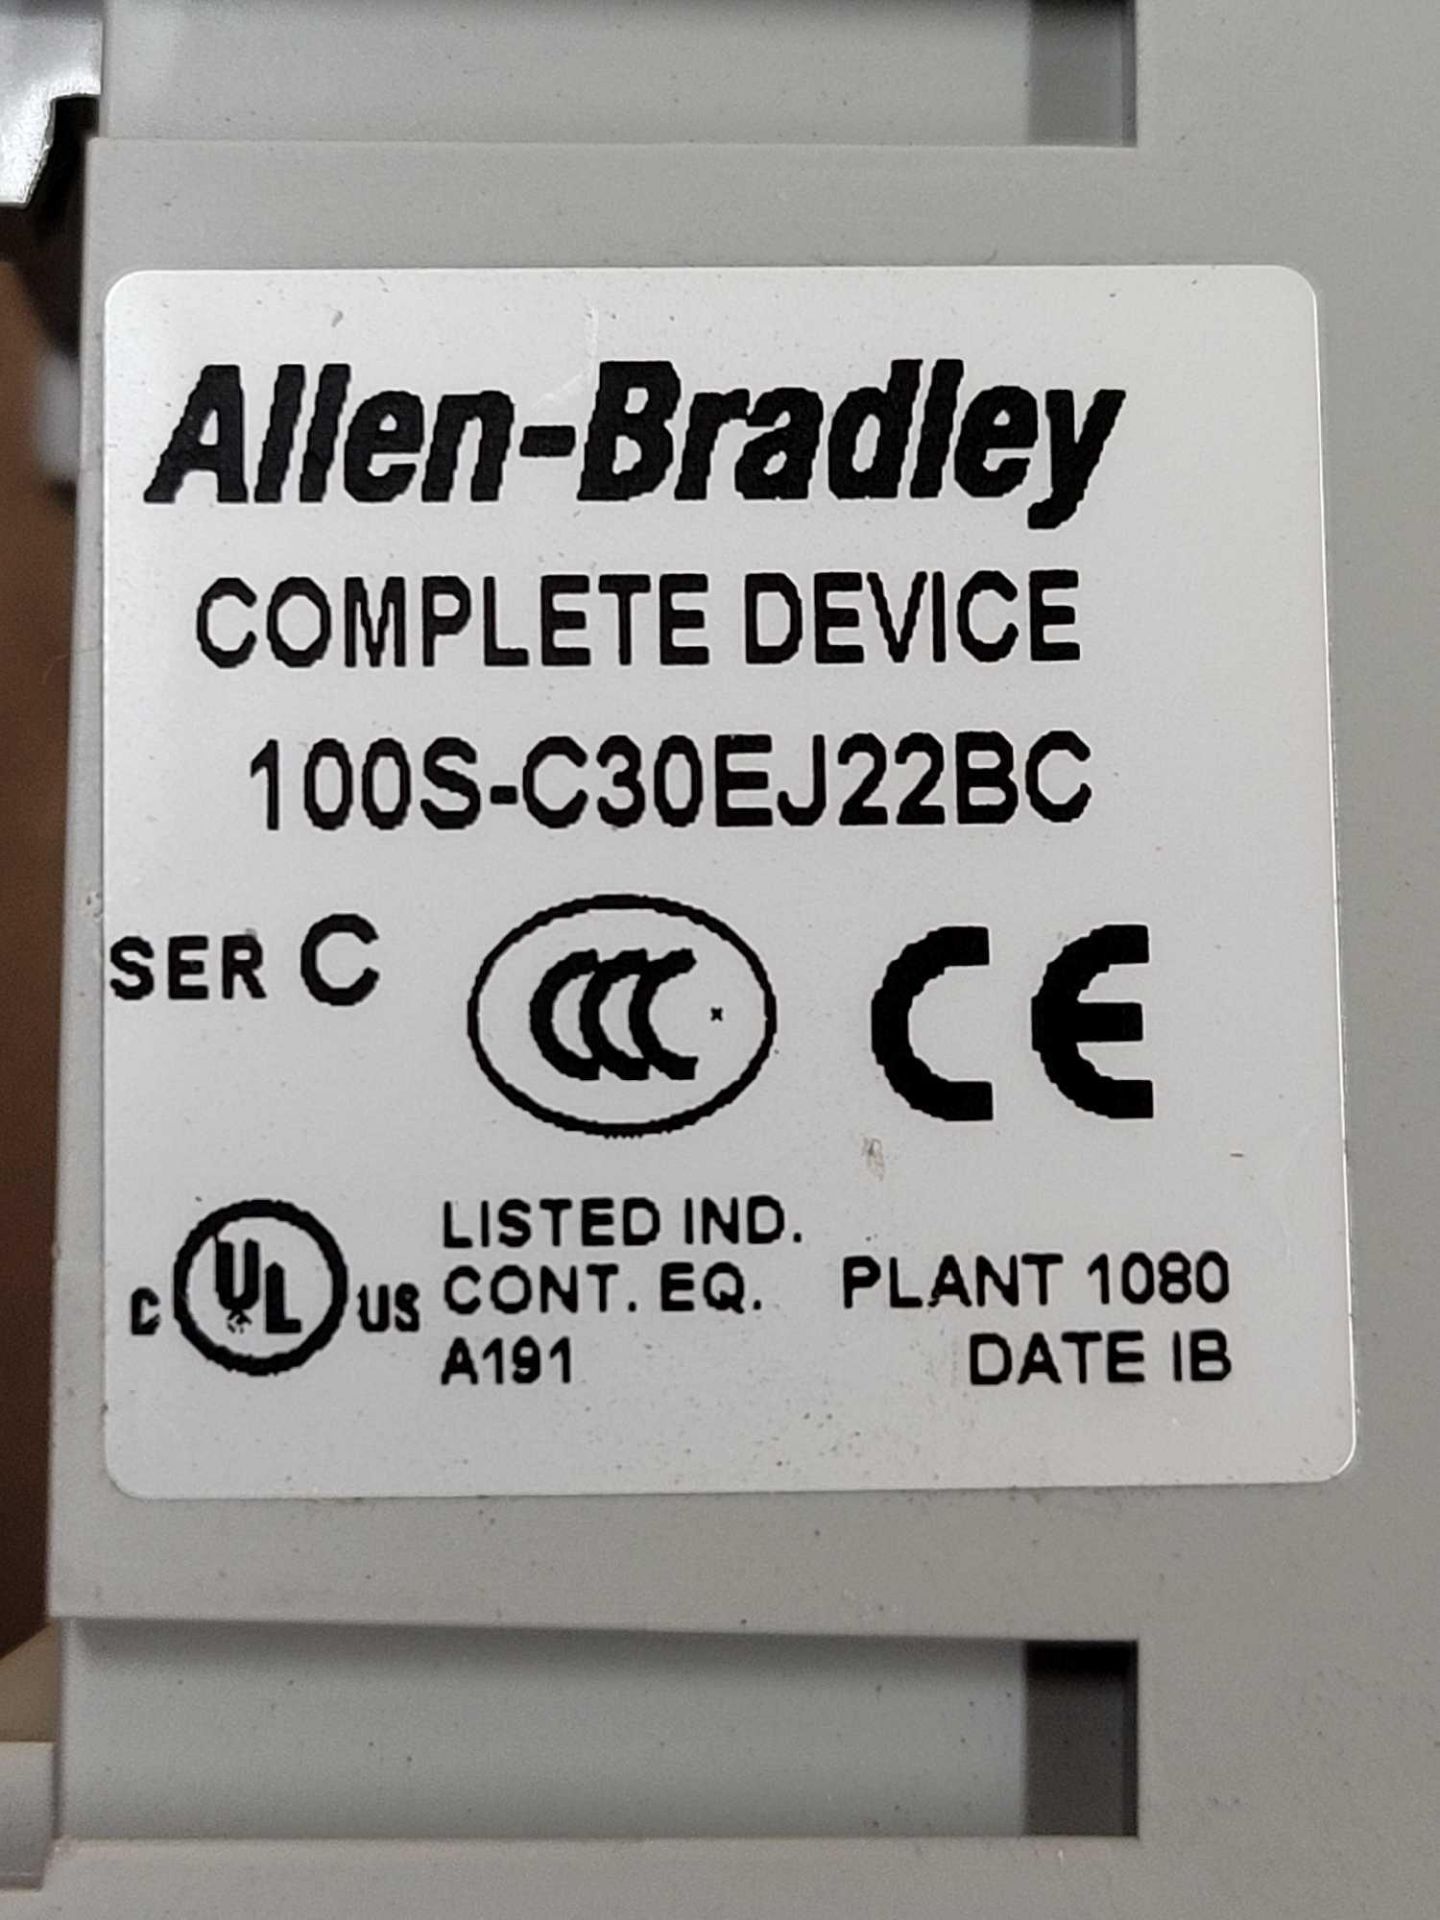 LOT OF 5 ALLEN BRADLEY 100S-C30EJ22BC / Series C Guardmaster Safety Contactor  /  Lot Weight: 6.2 lb - Image 2 of 7